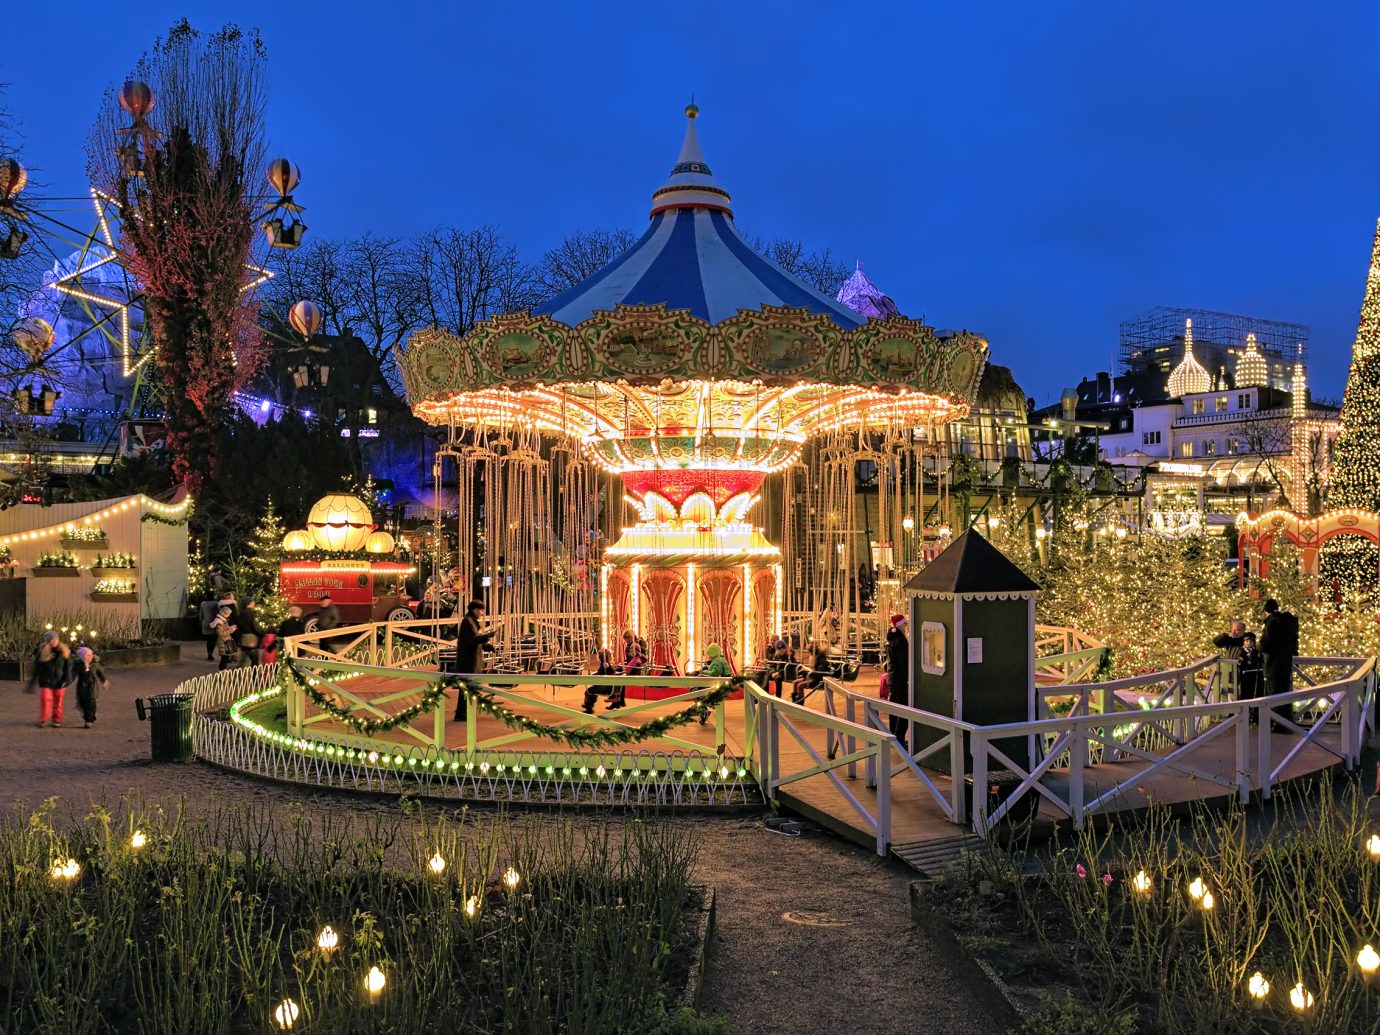 Chain carousel and christmas illumination in Tivoli Gardens. Tivoli Gardens is a famous amusement park and pleasure garden; it is the most-visited theme park in Scandinavia.